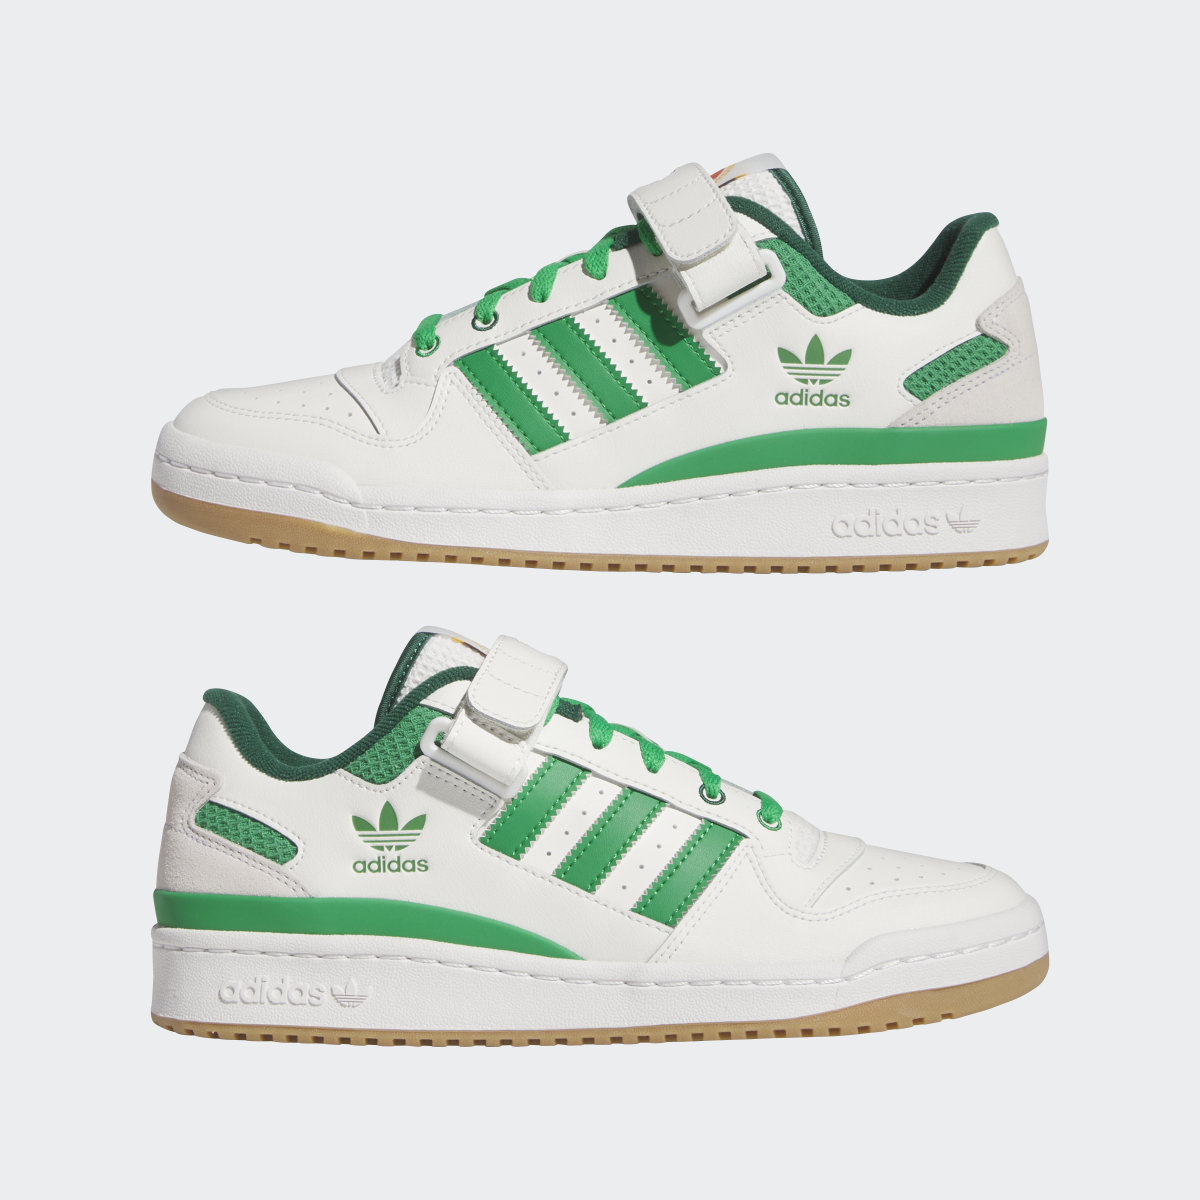 Adidas Forum Low Shoes. 10